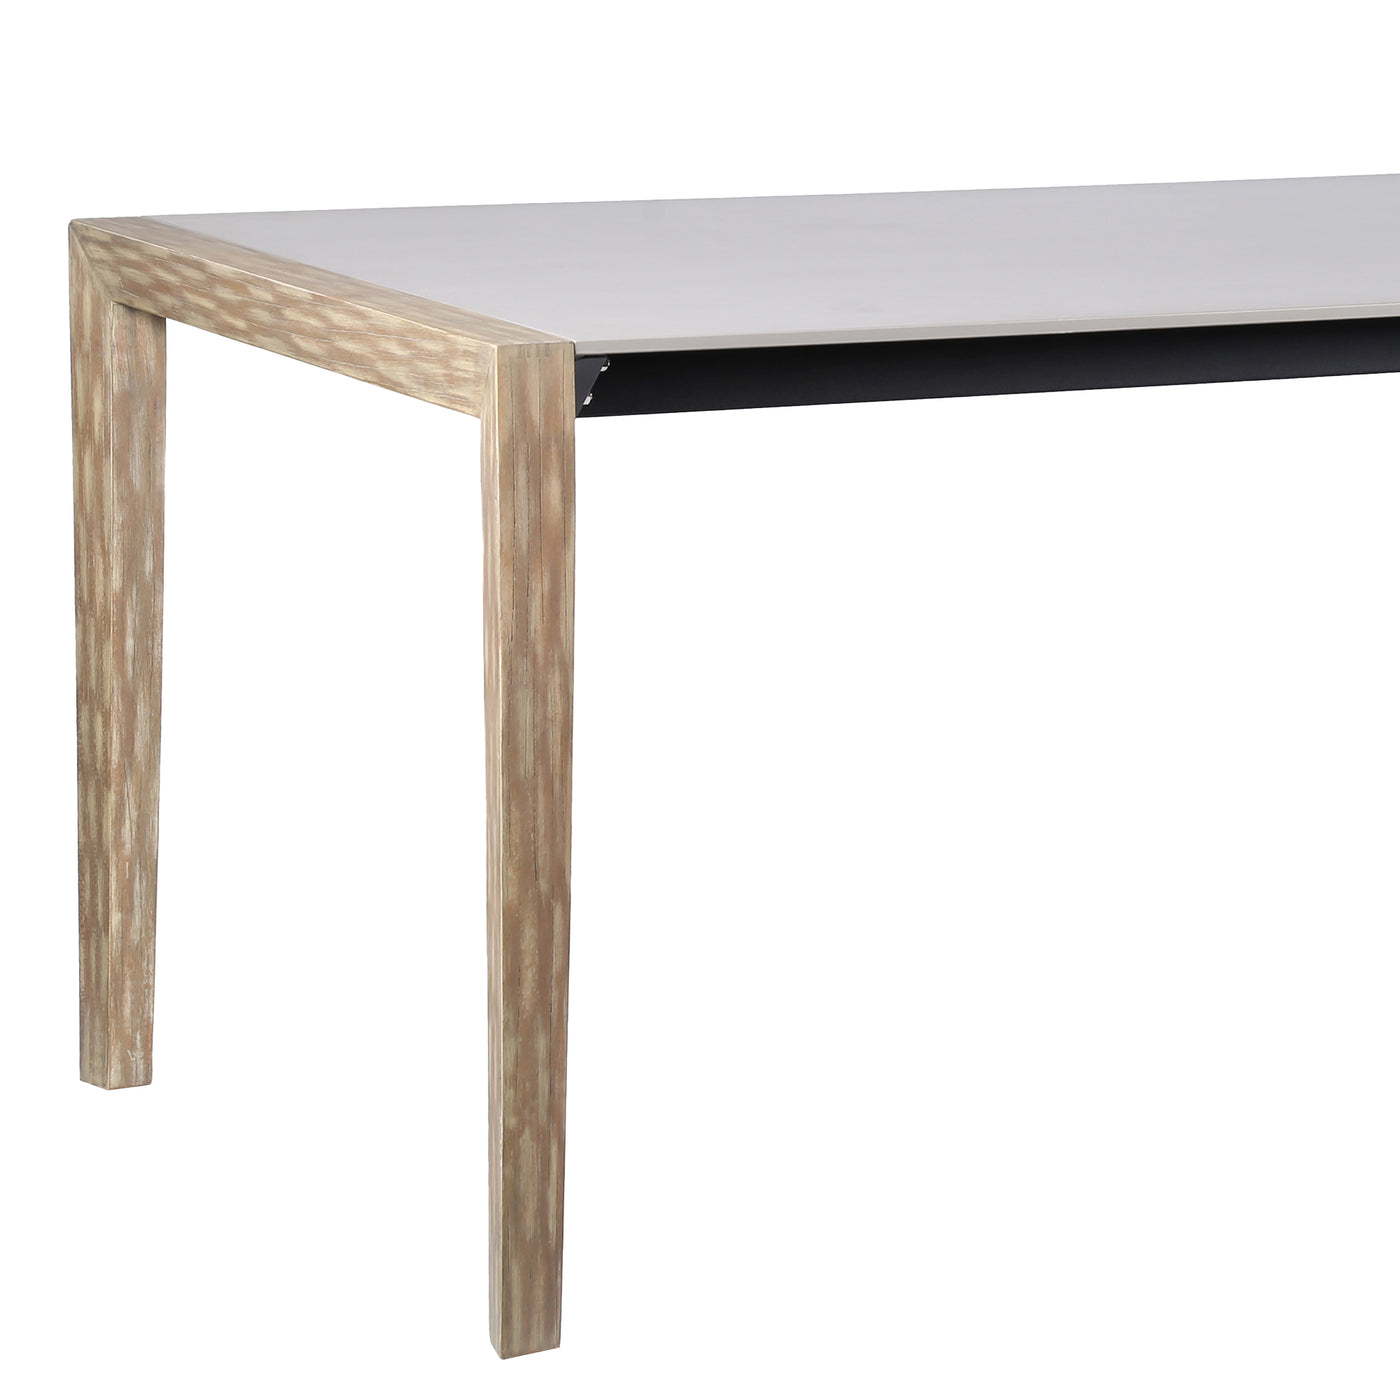 Fineline Outdoor Dining Table